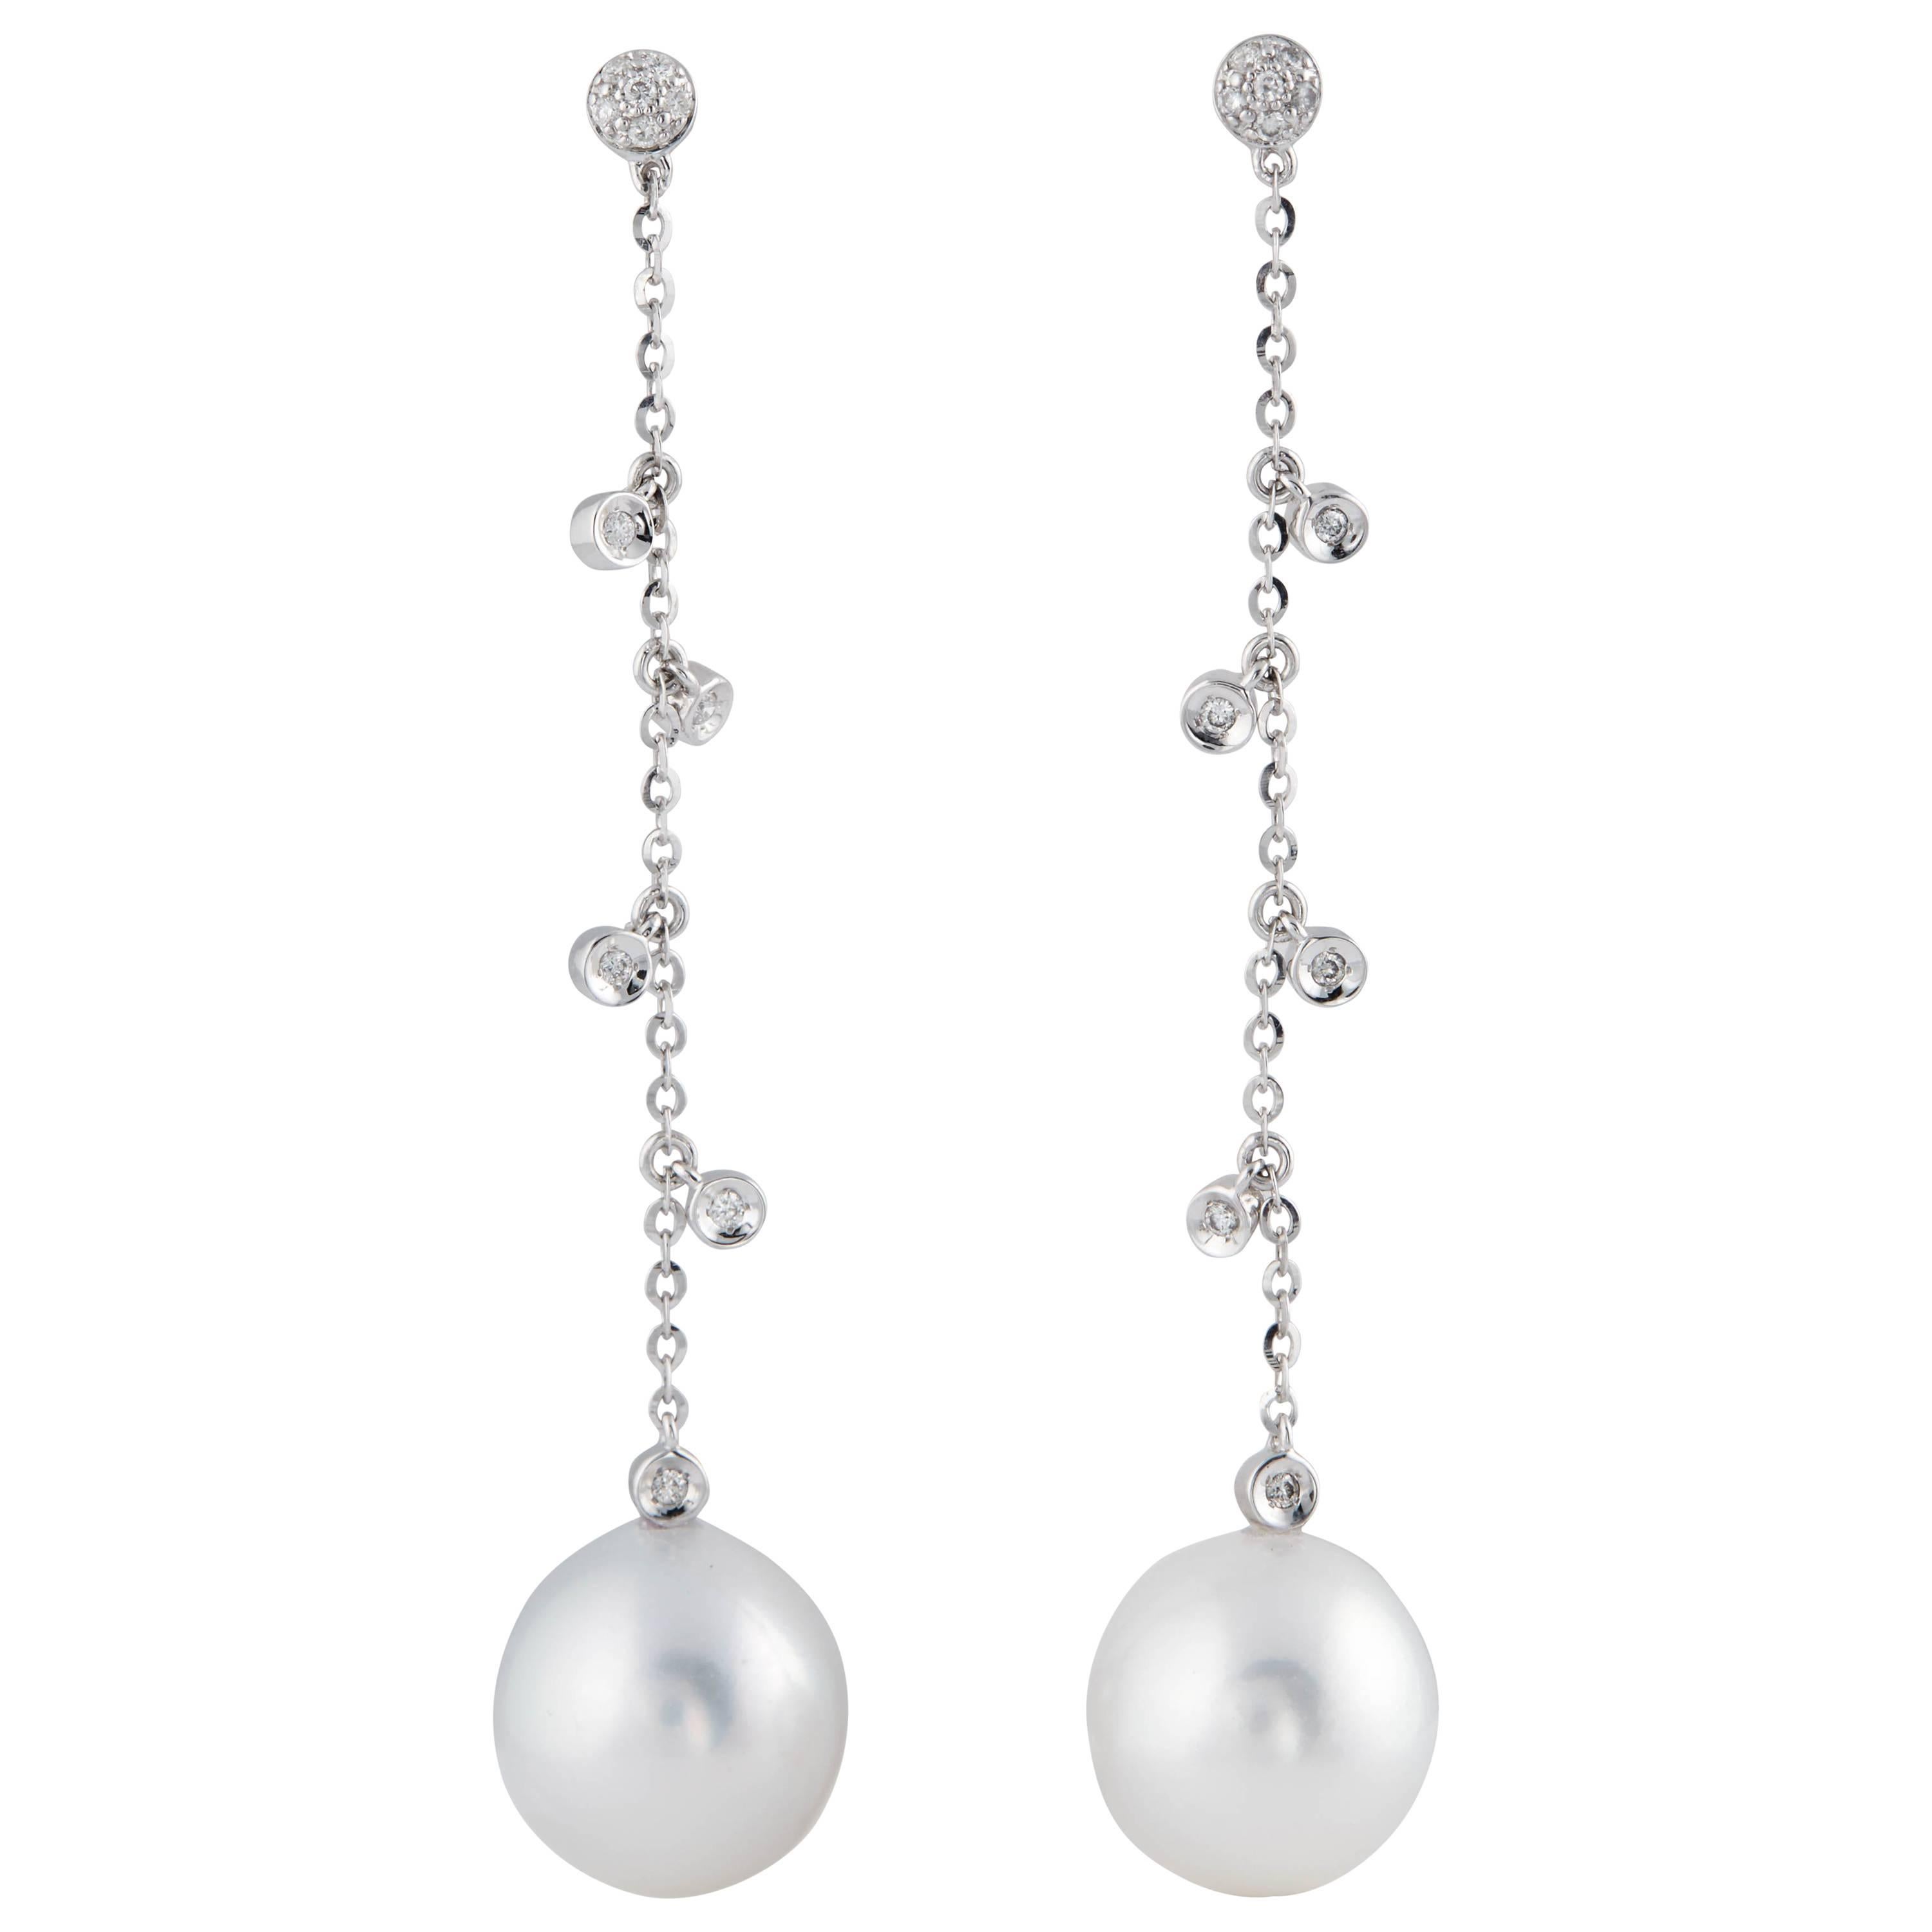 Dangling South Sea Pearl with Diamond Accent Earrings